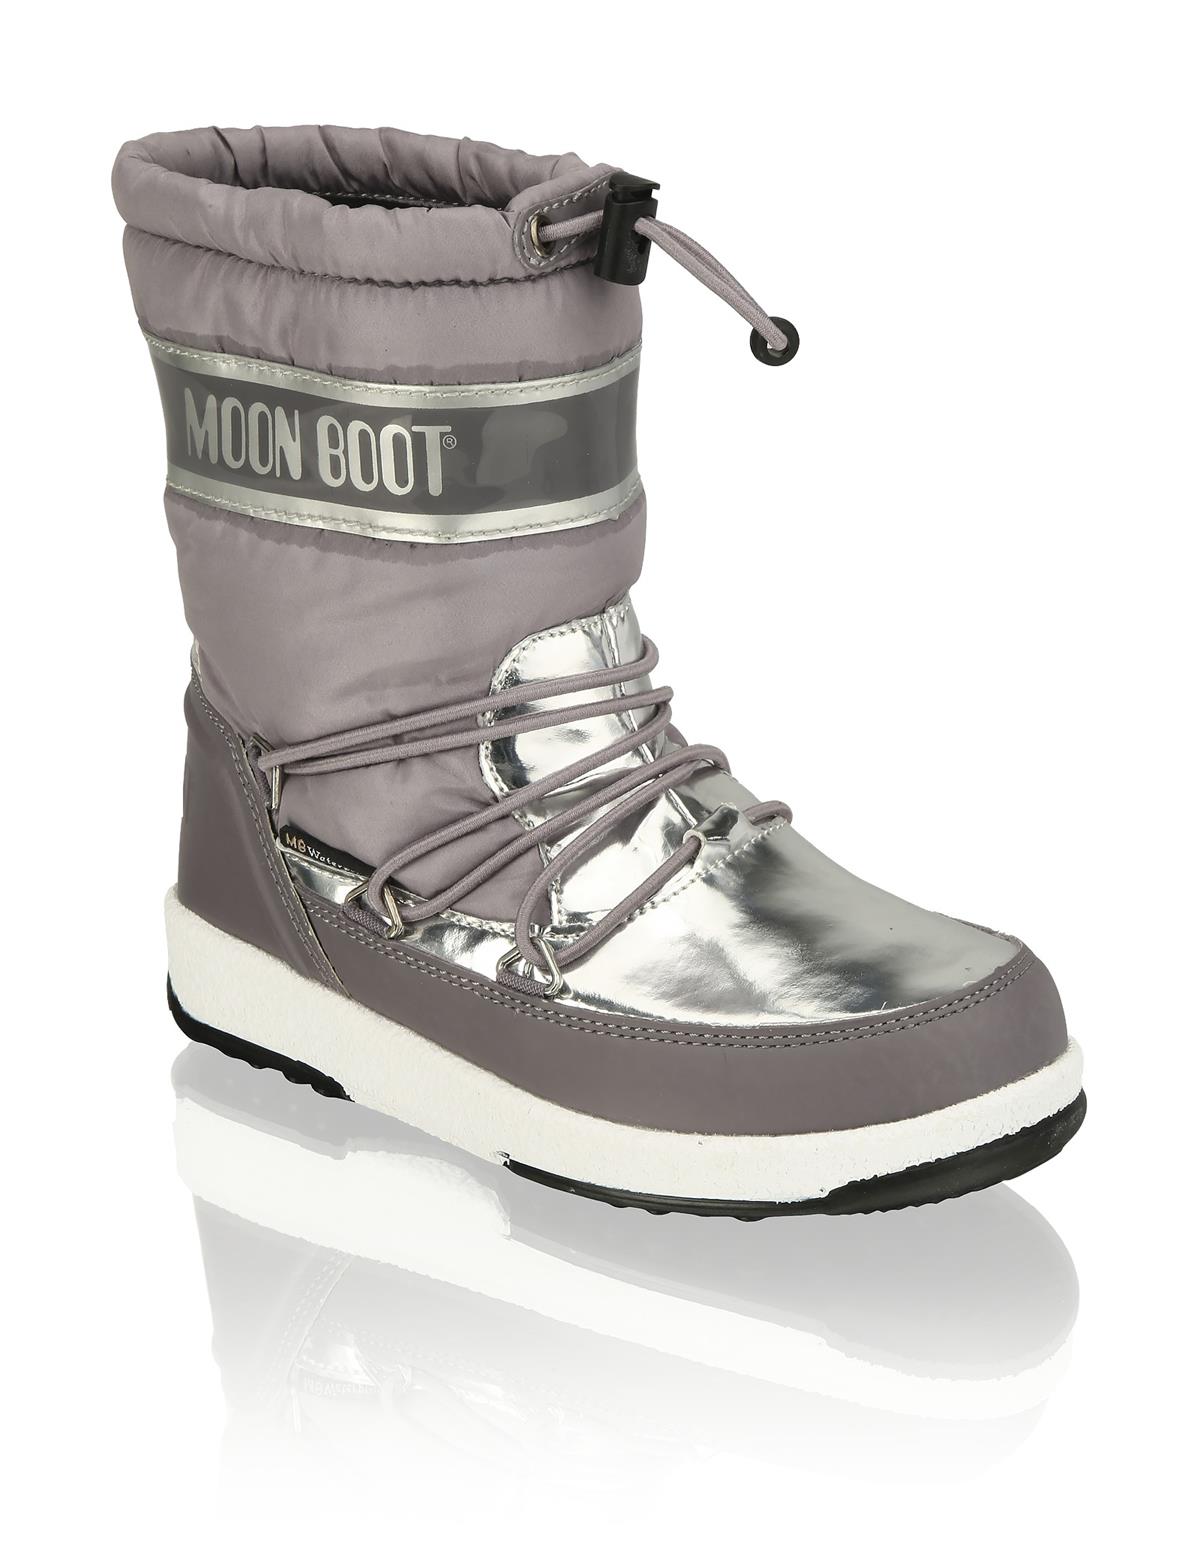 HUMANIC 110 Moon Boots Kids Snow Boot EUR 84,95 3623800324